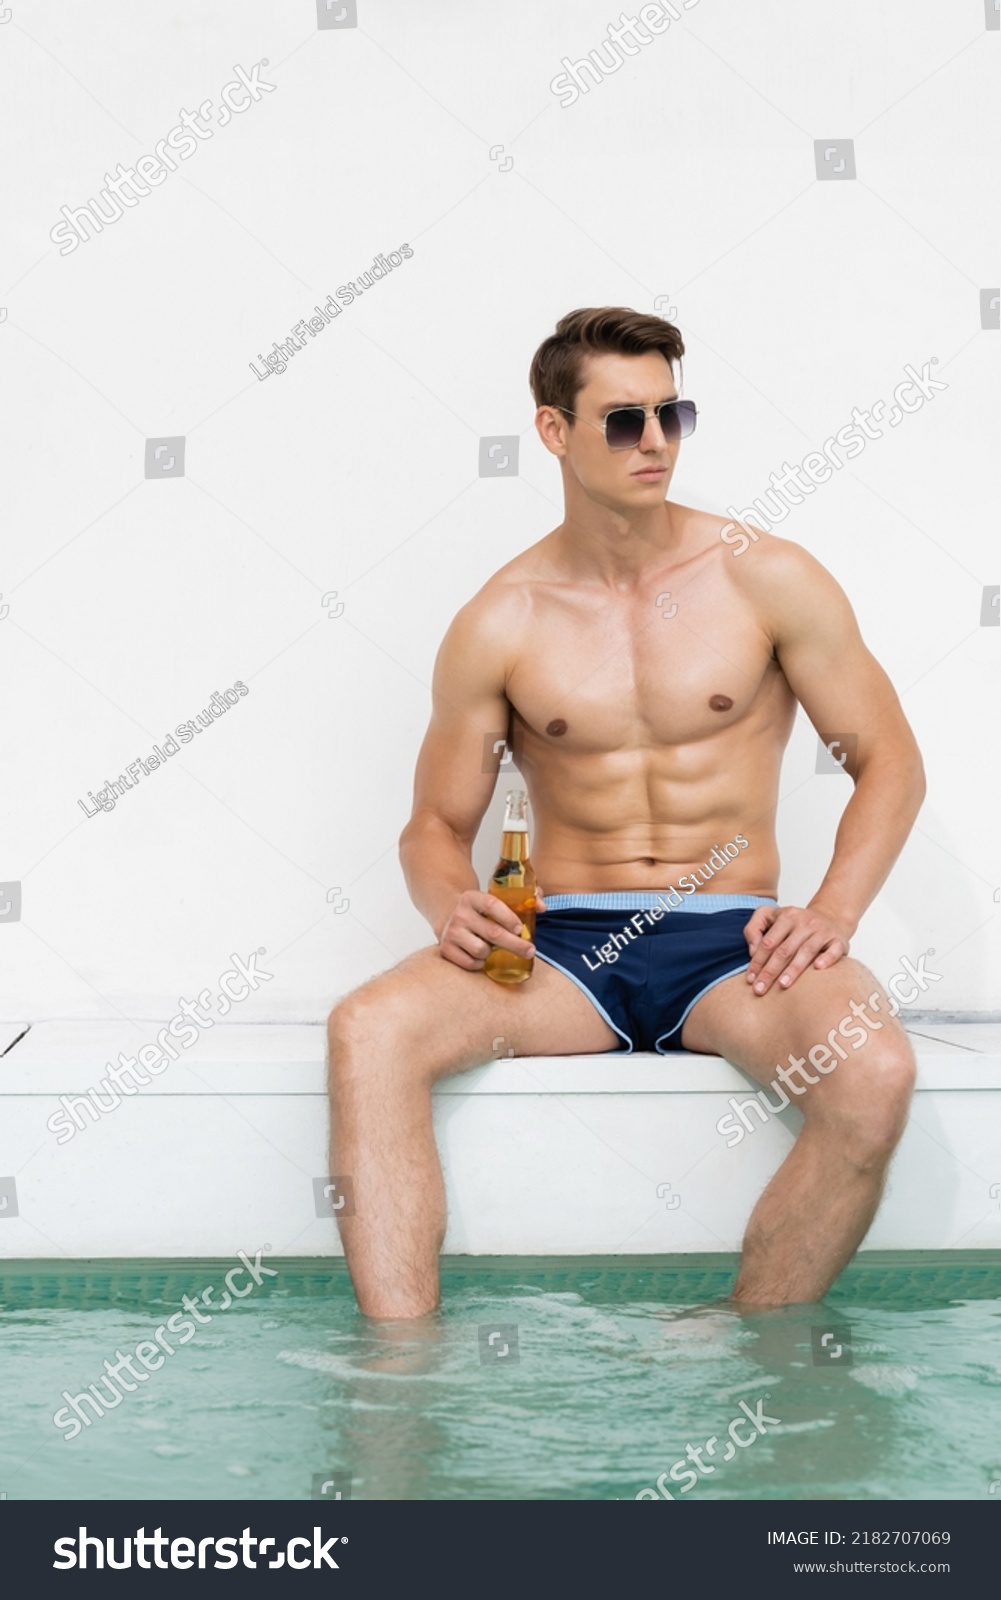 muscular man in swimming trunks and sunglasses sitting at poolside with bottle of beer #2182707069